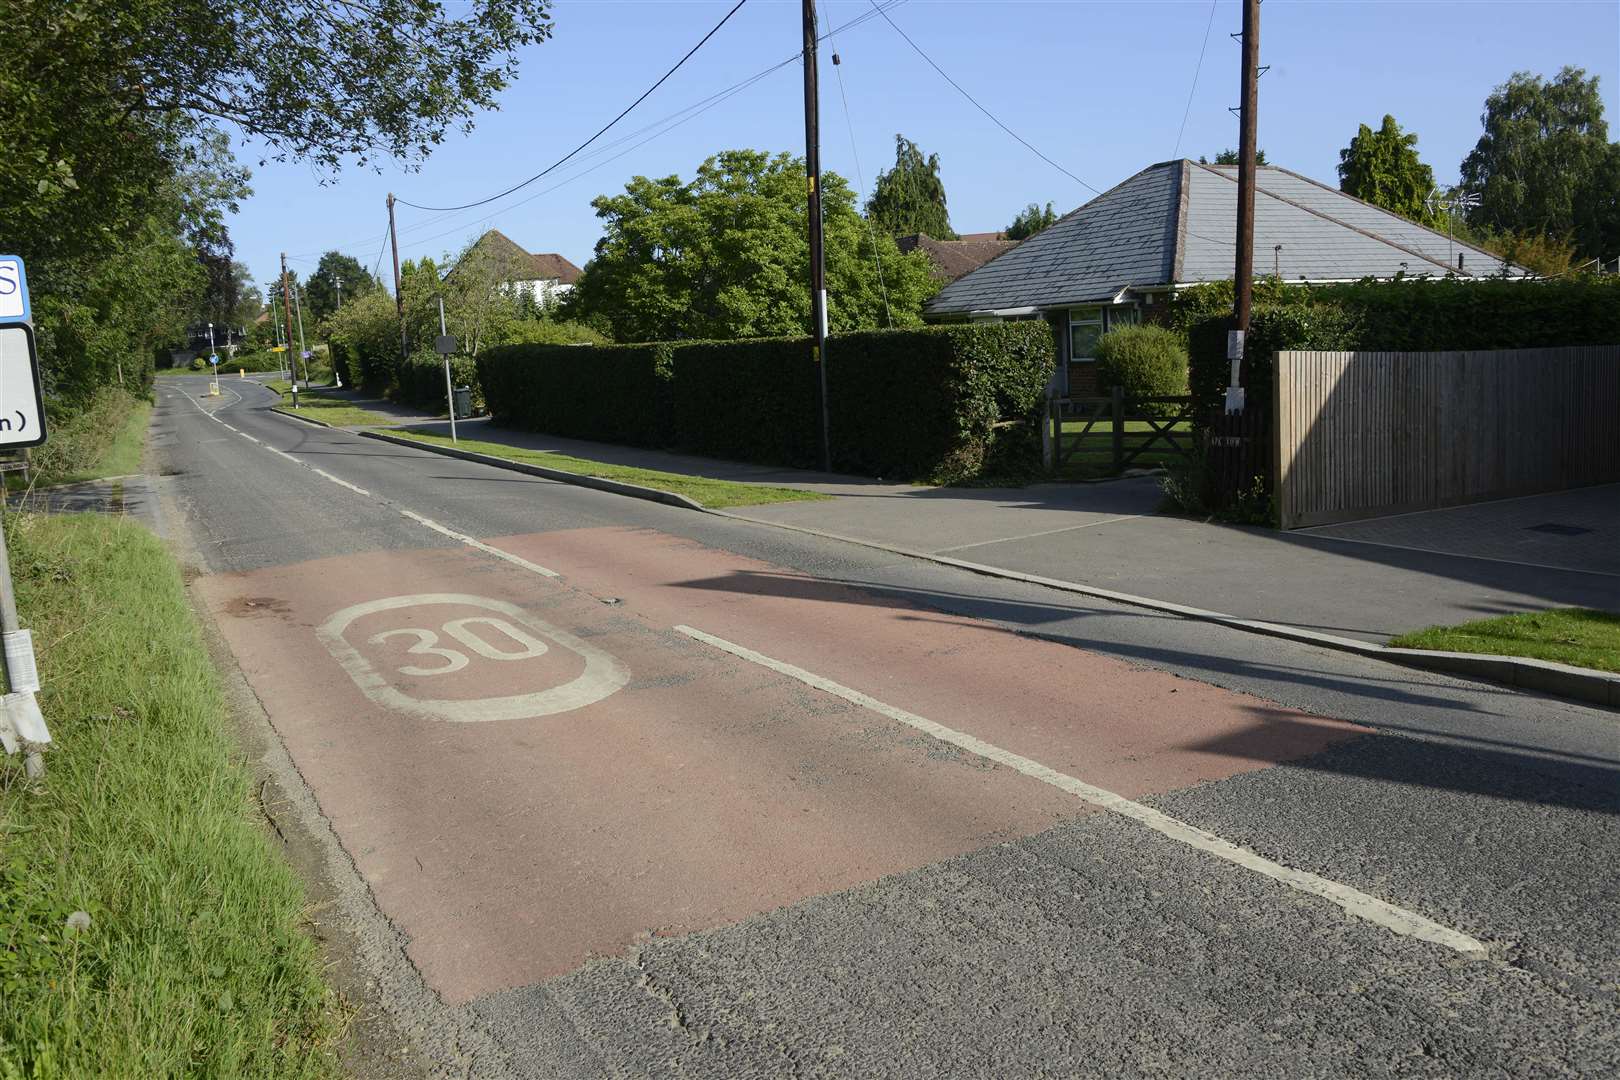 Smallhythe Road, where the retirement complex will be built